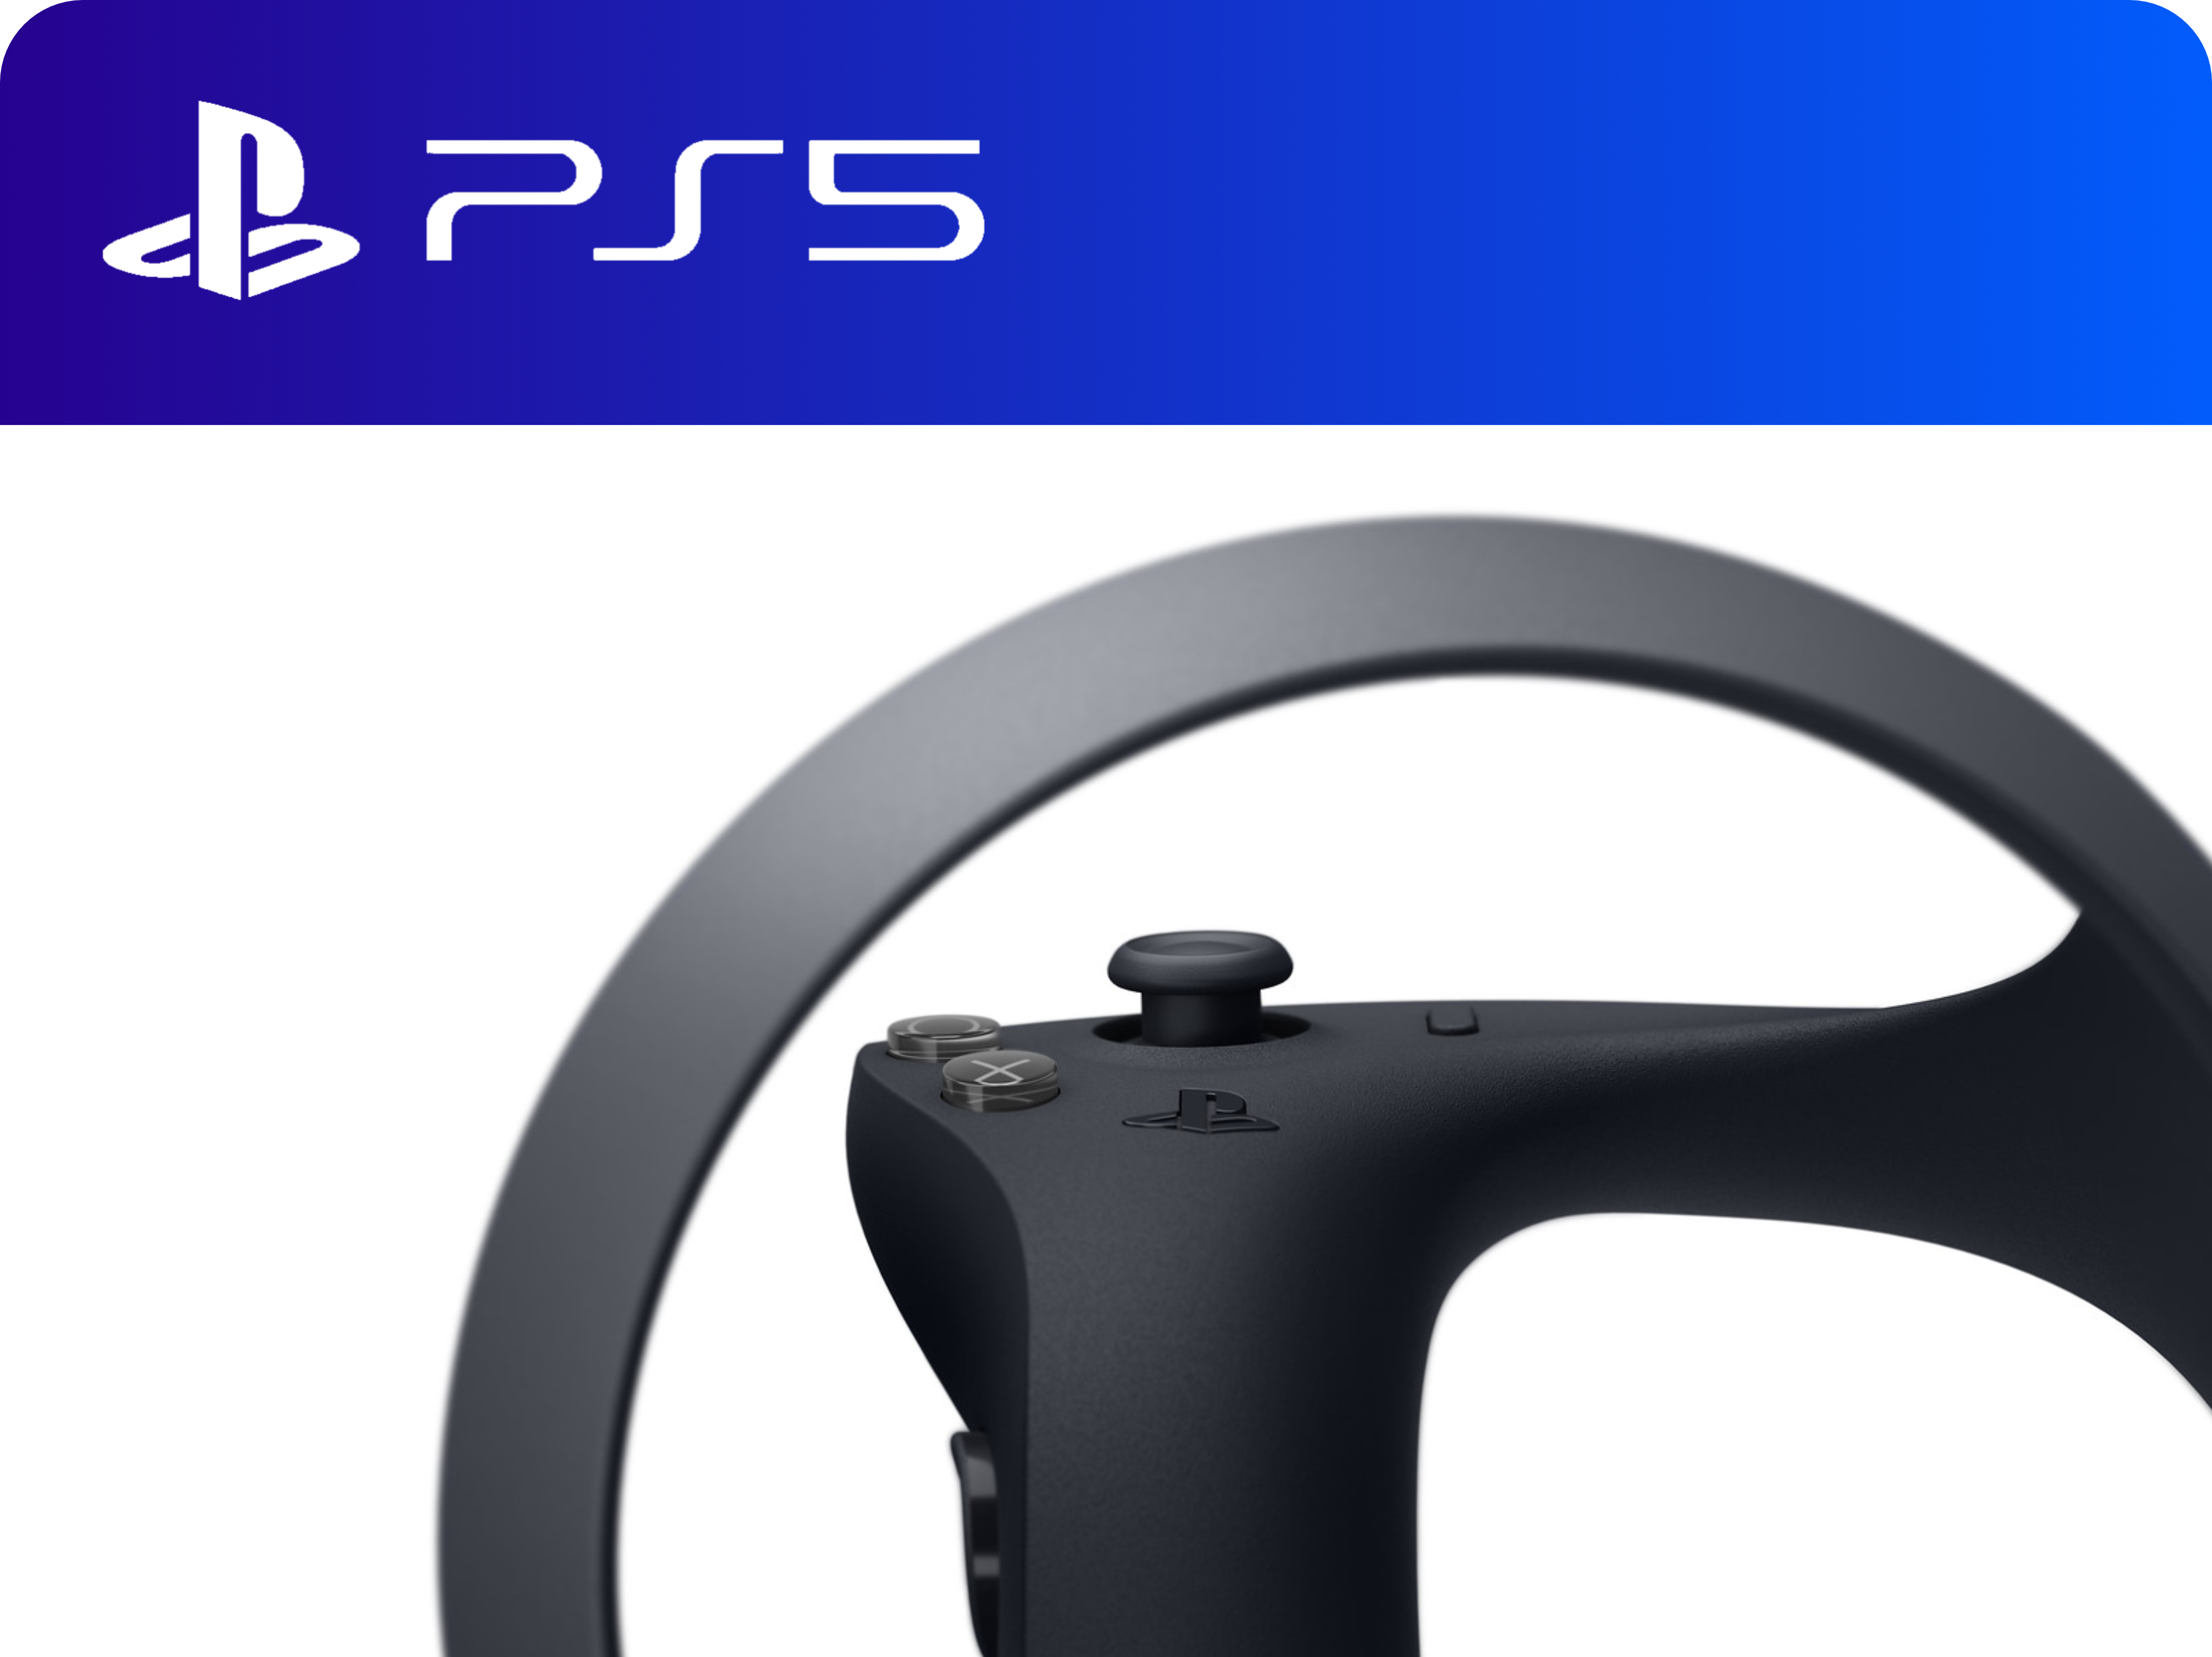 Sony shows off next-gen PS5 VR controllers